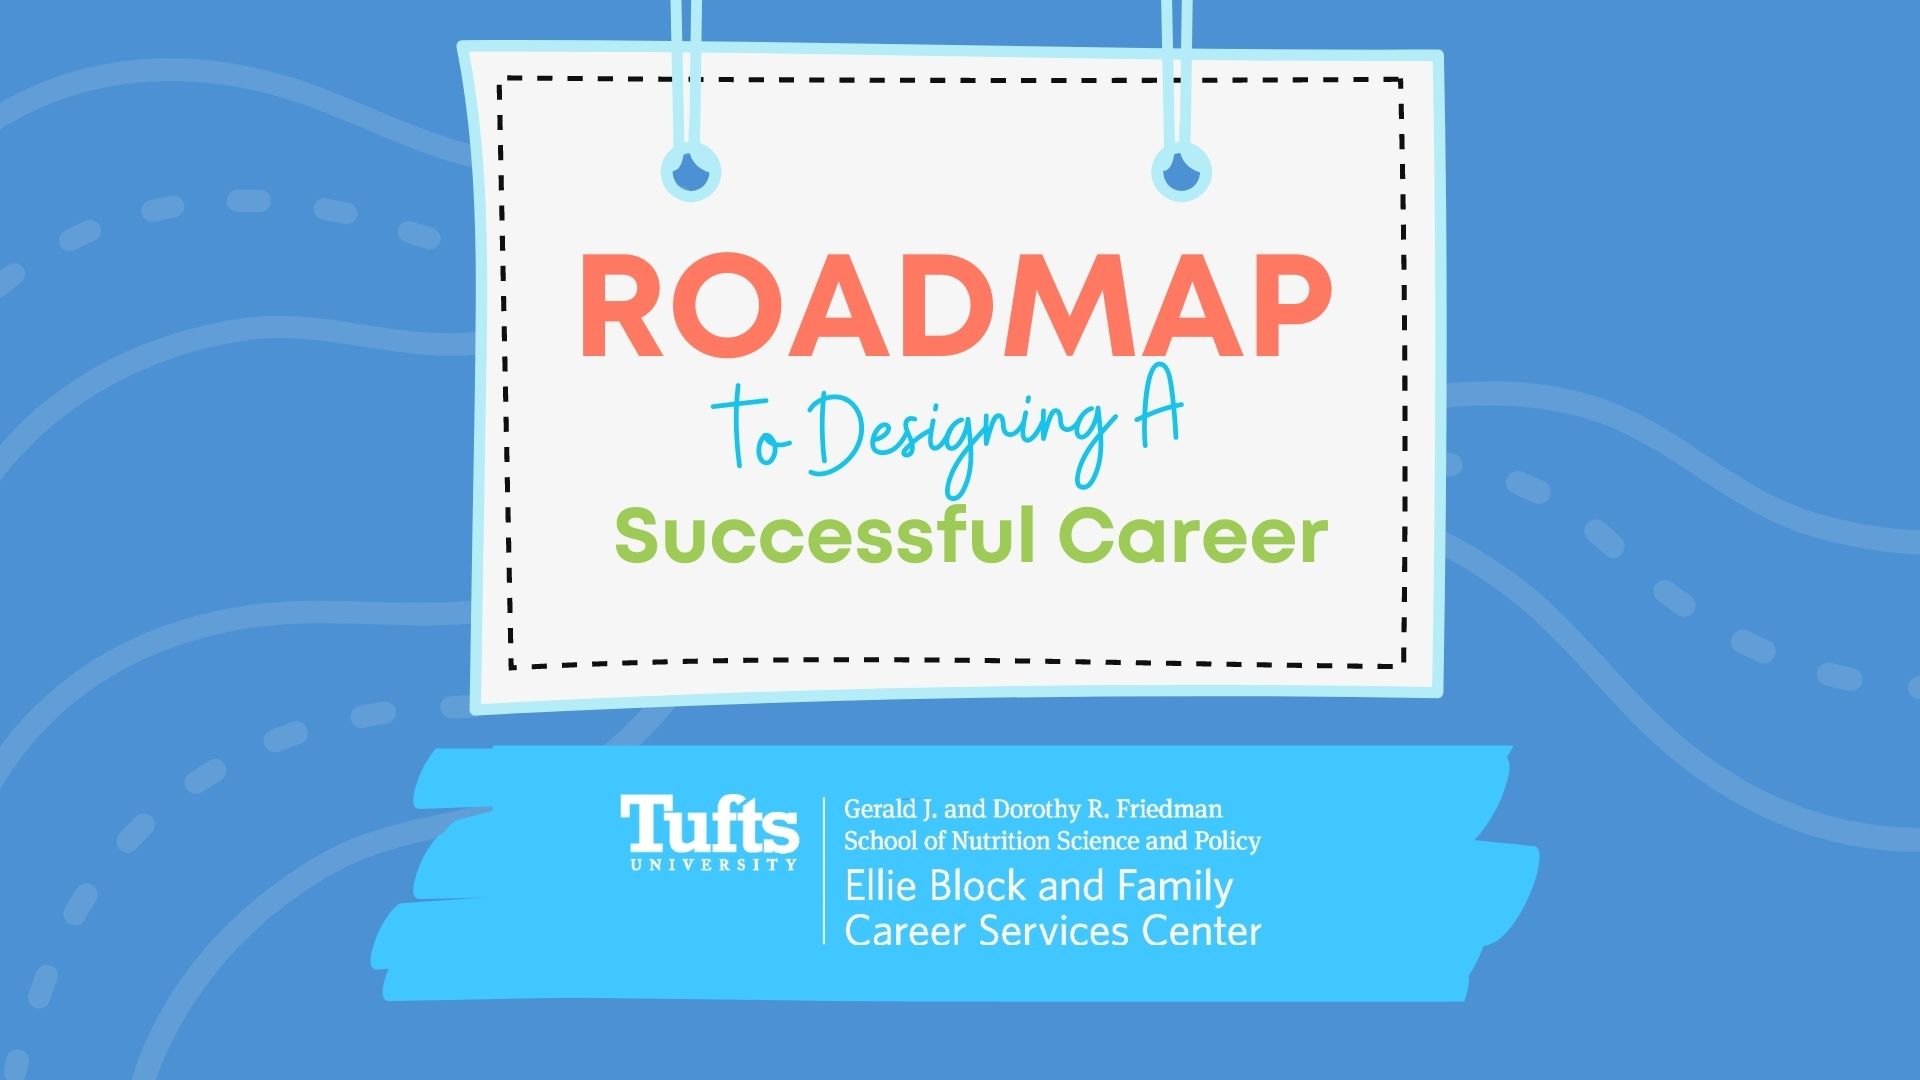 a graphic featuring the roadmap to designing a successful career activities